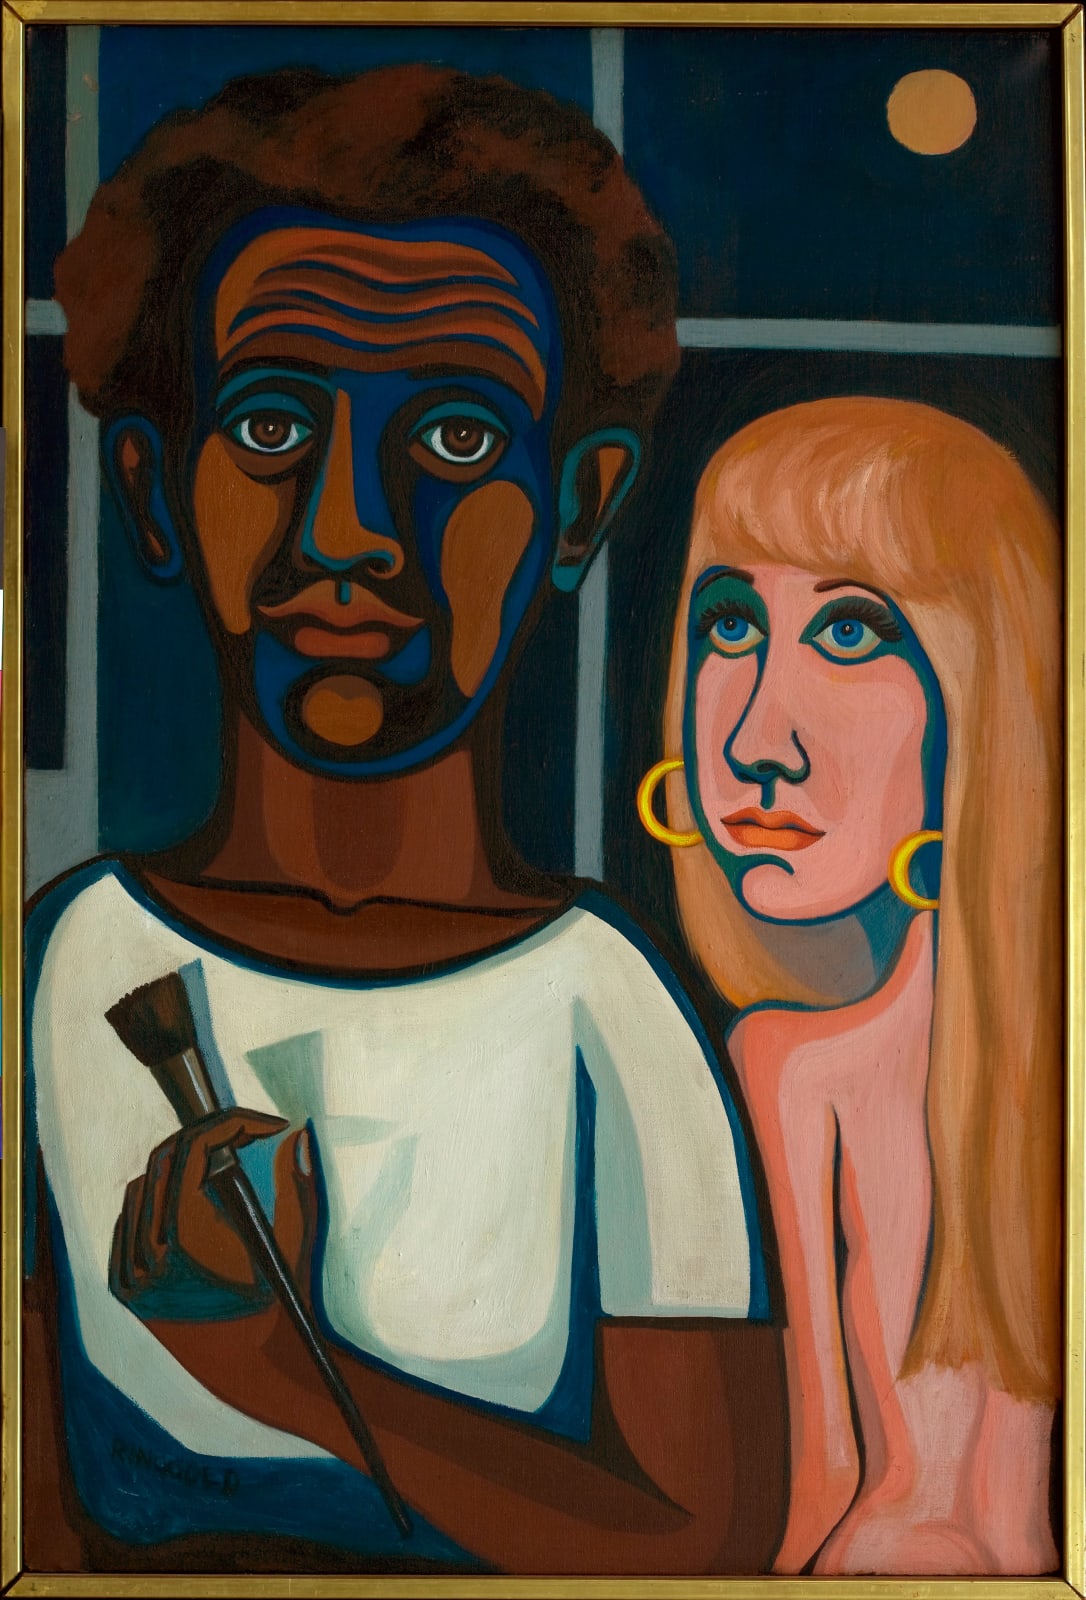 Faith Ringgold, American People Series #17: The Artist and His Model, 1966